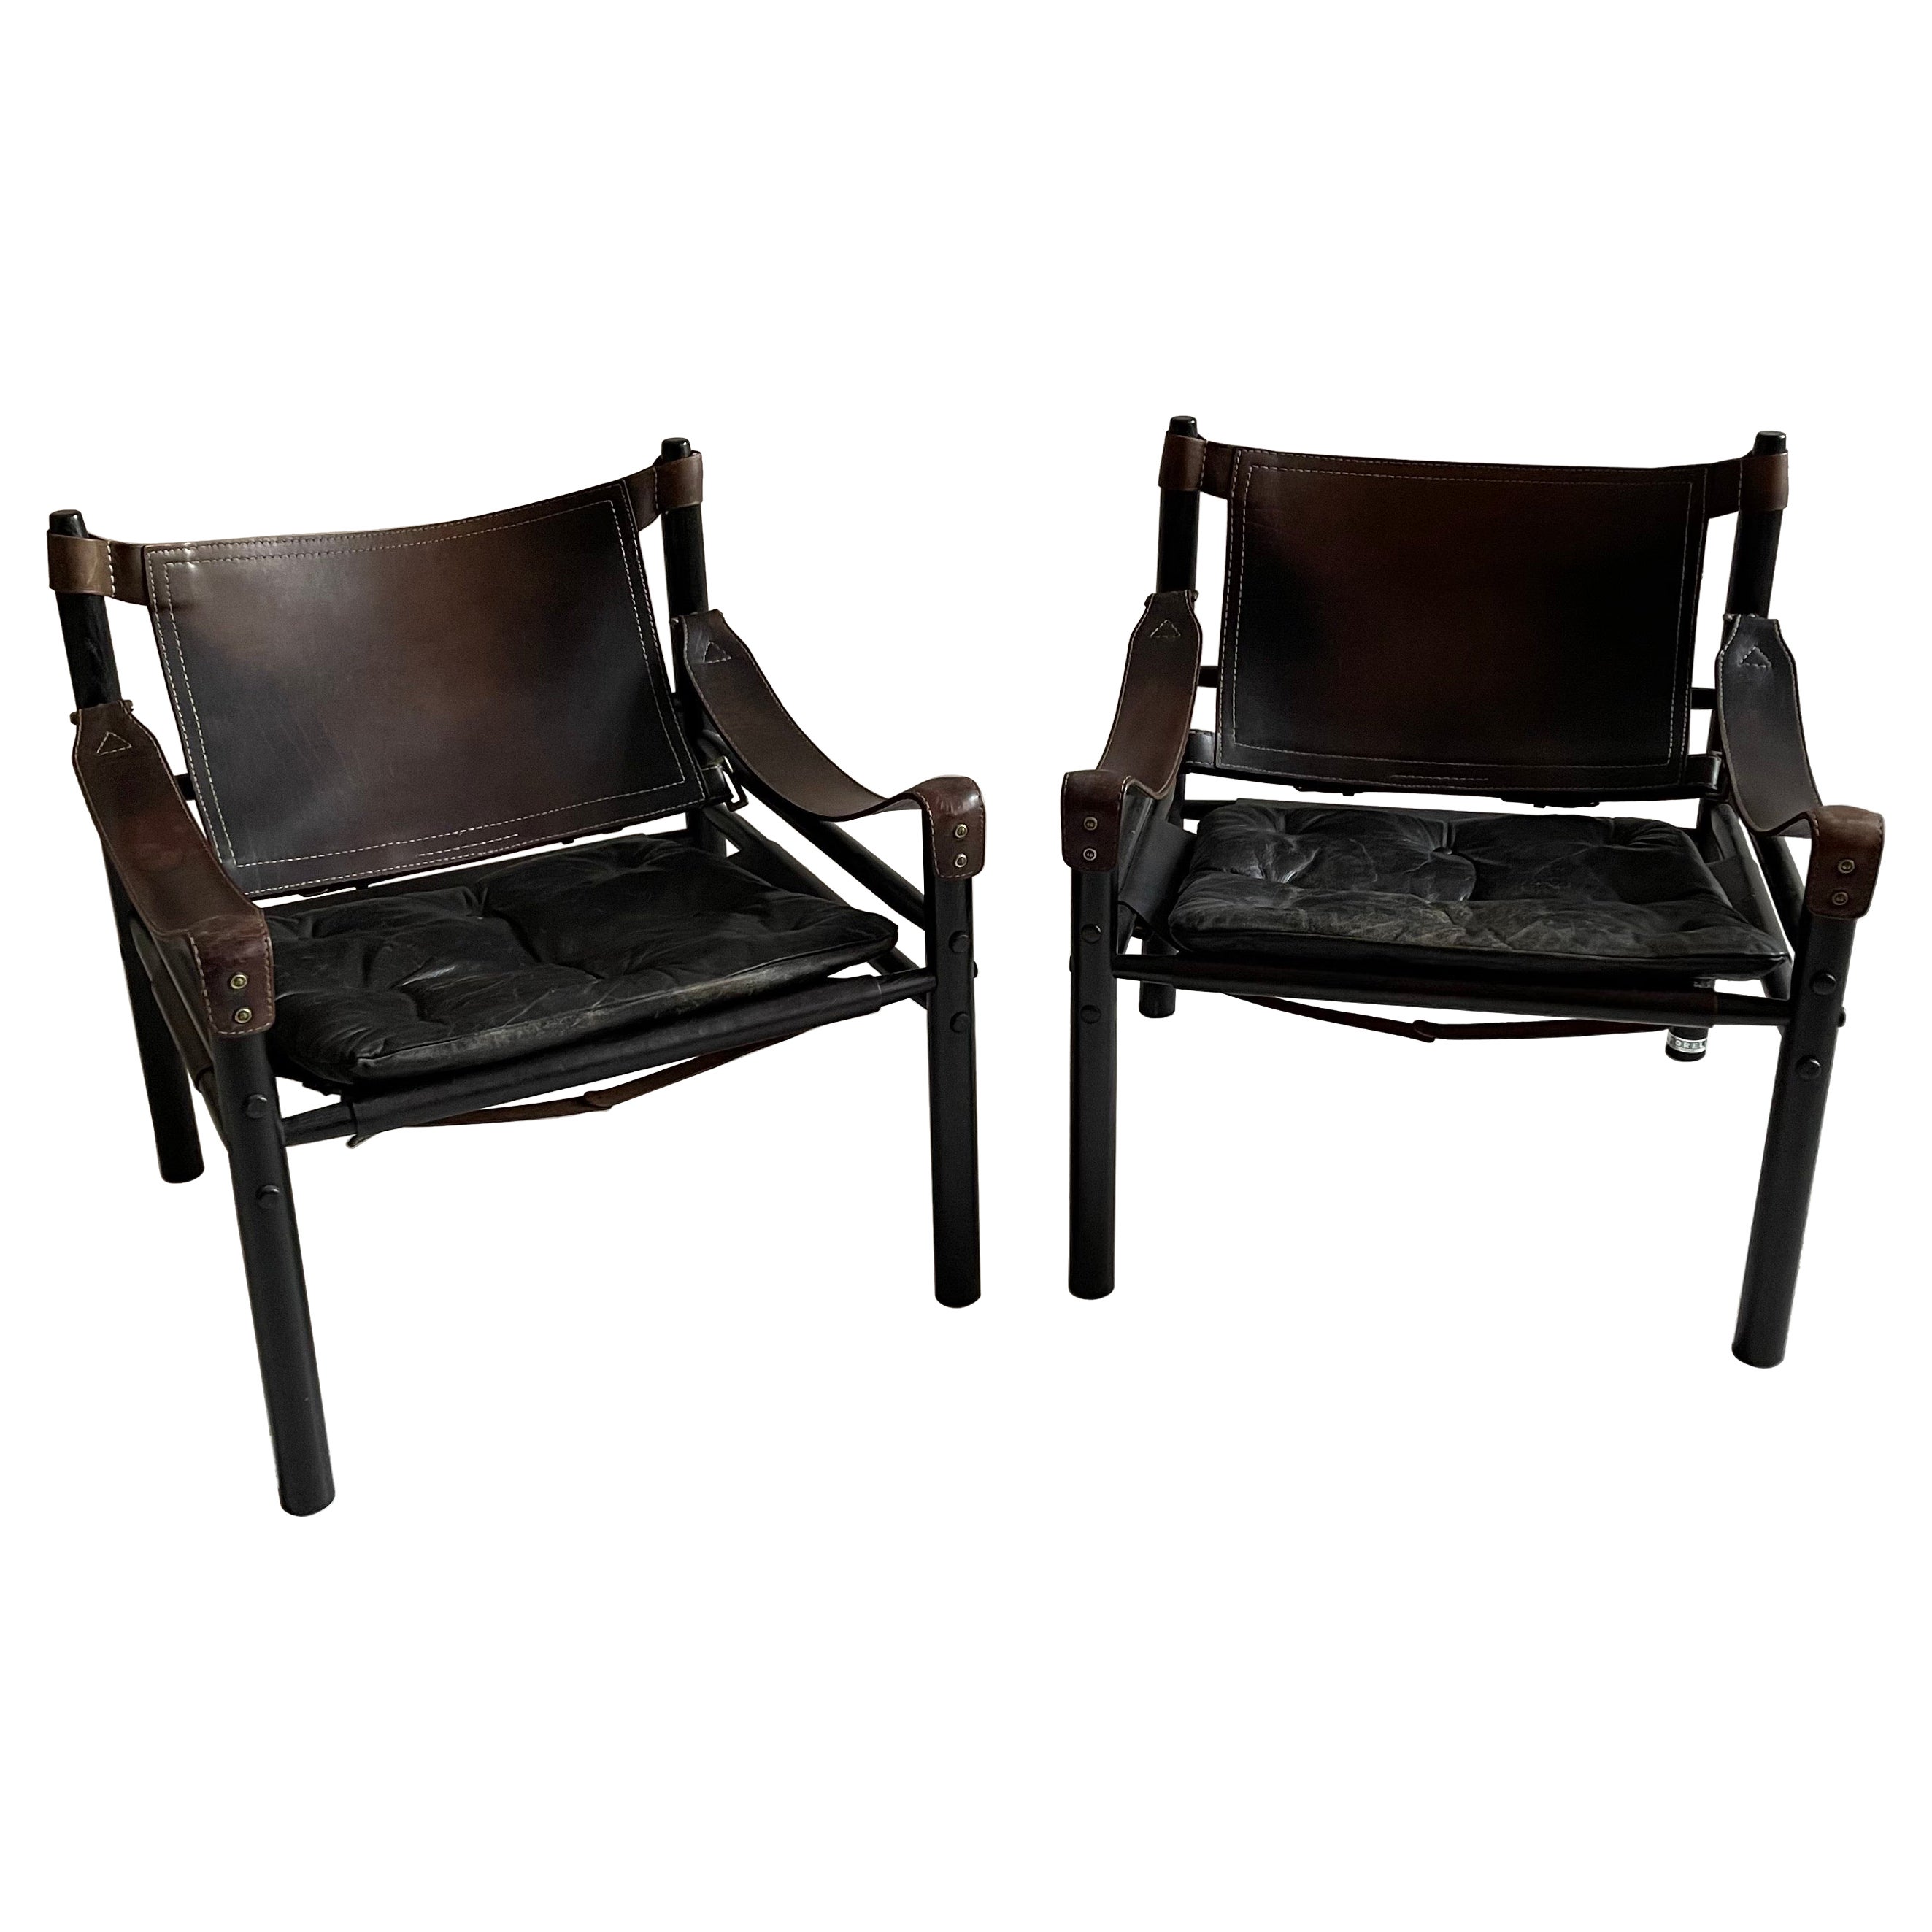 Arne Norell Sirocco Safari Chairs Set of Two, Sweden 1960s